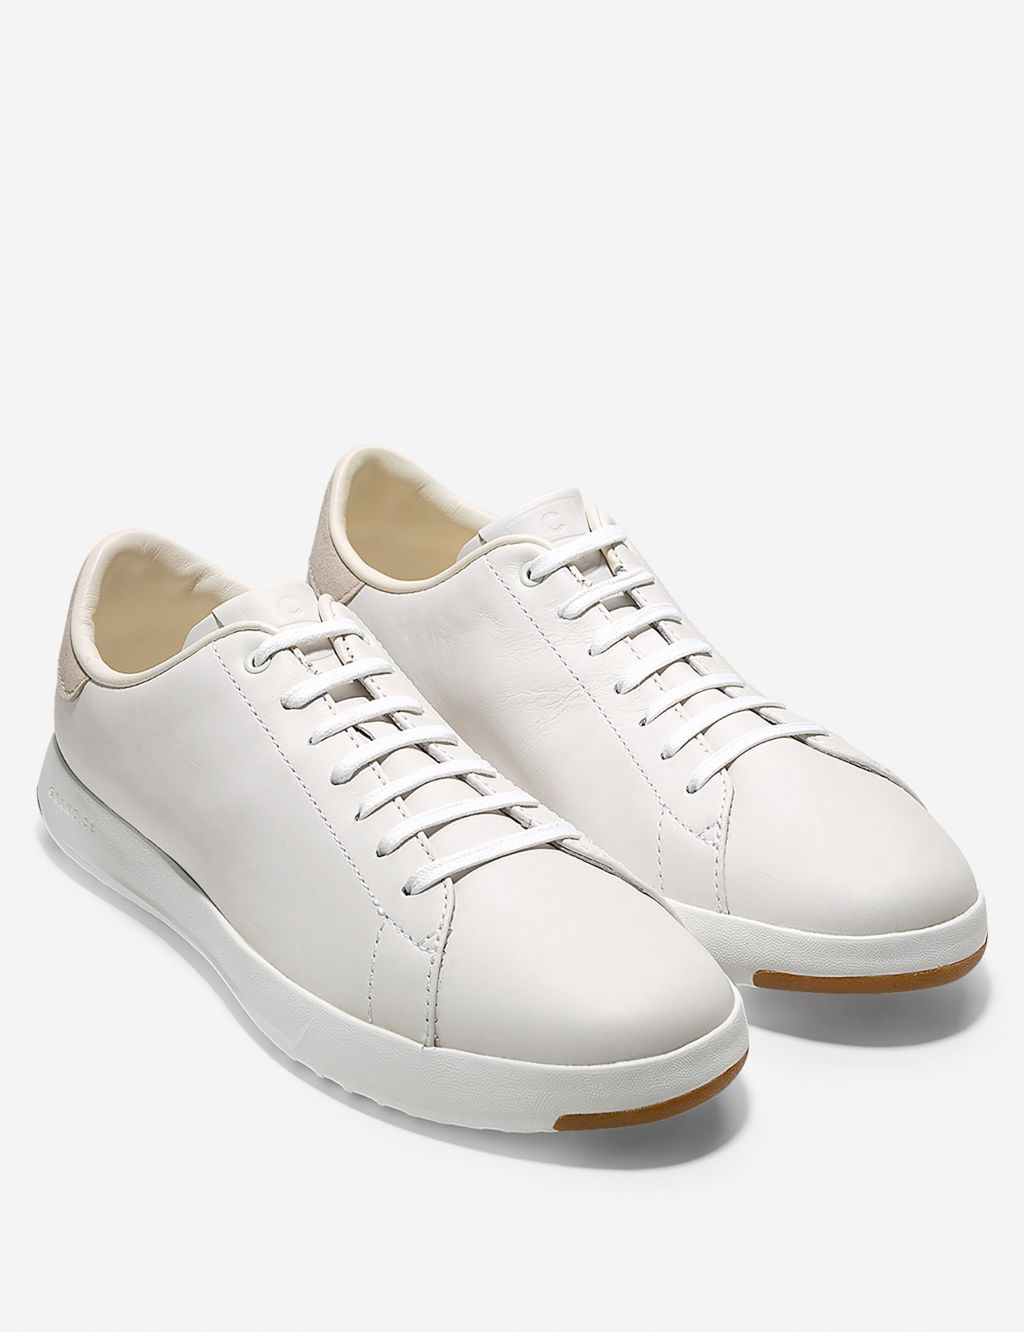 Grandpro Leather Lace Up Trainers image 2